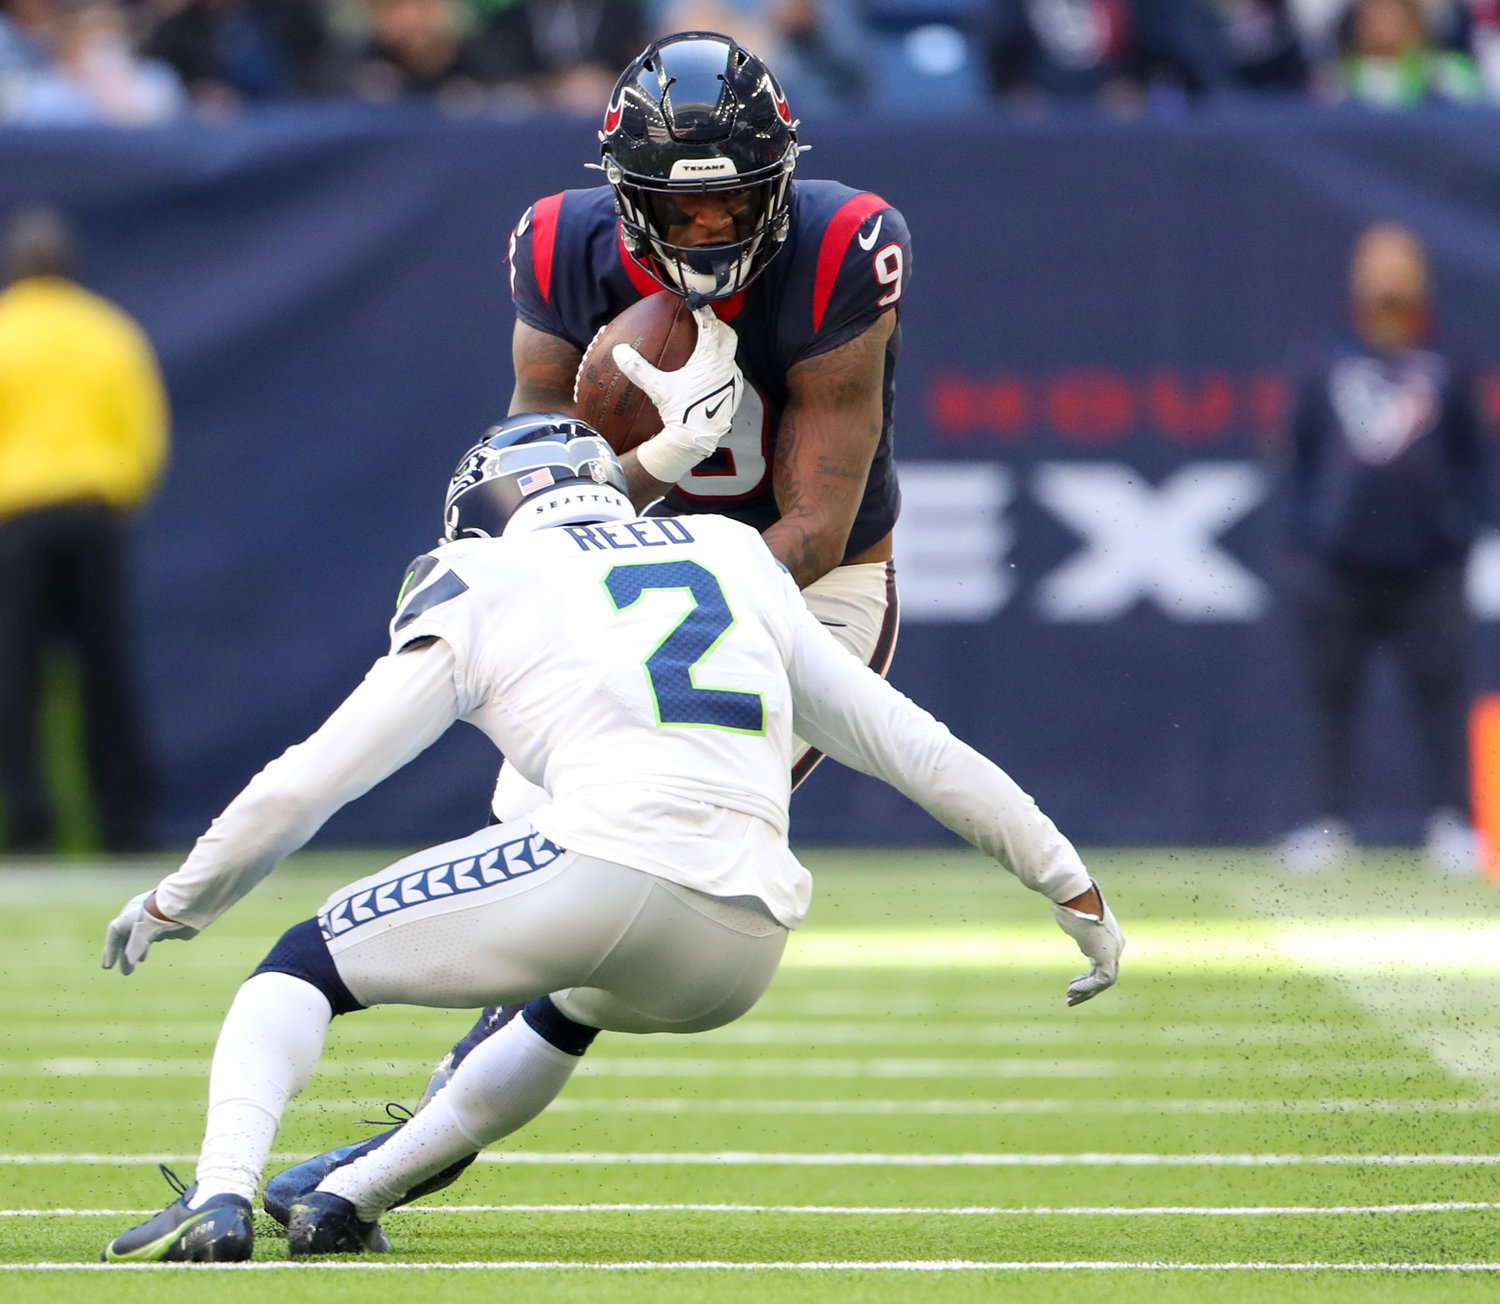 Houston Texans tight end Brevin Jordan (9) squares off against Seattle Seahawks cornerback D.J. Reed (2) after a catch during the second half of an NFL game between the Seahawks and the Texans on December 12, 2021 in Houston, Texas.